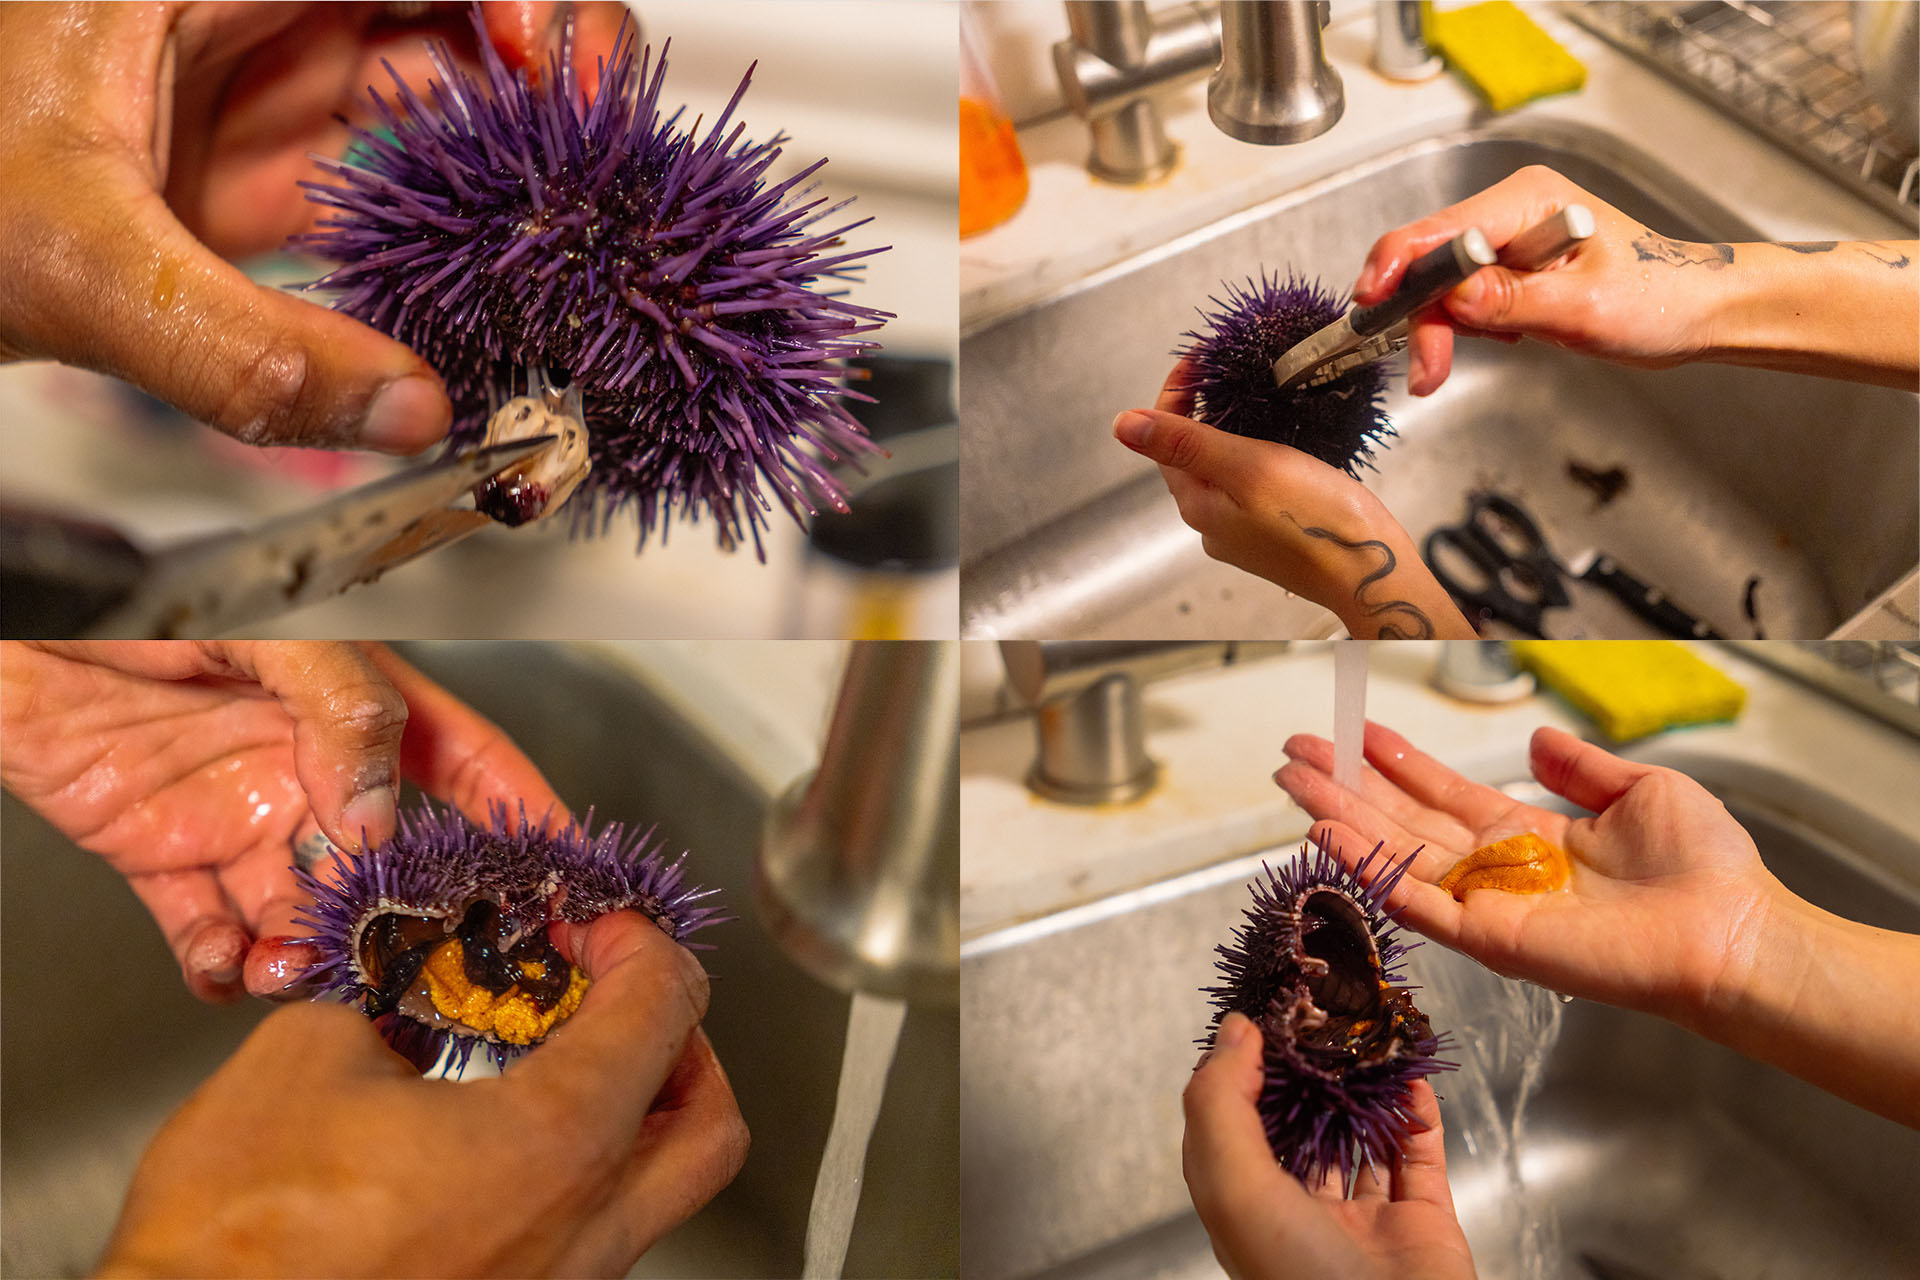 Four photos showing the steps to crack open a sea urchin: detaching the beak, prying the shell open, washing out the debris and then, finally, removing the creamy, orange gonad.